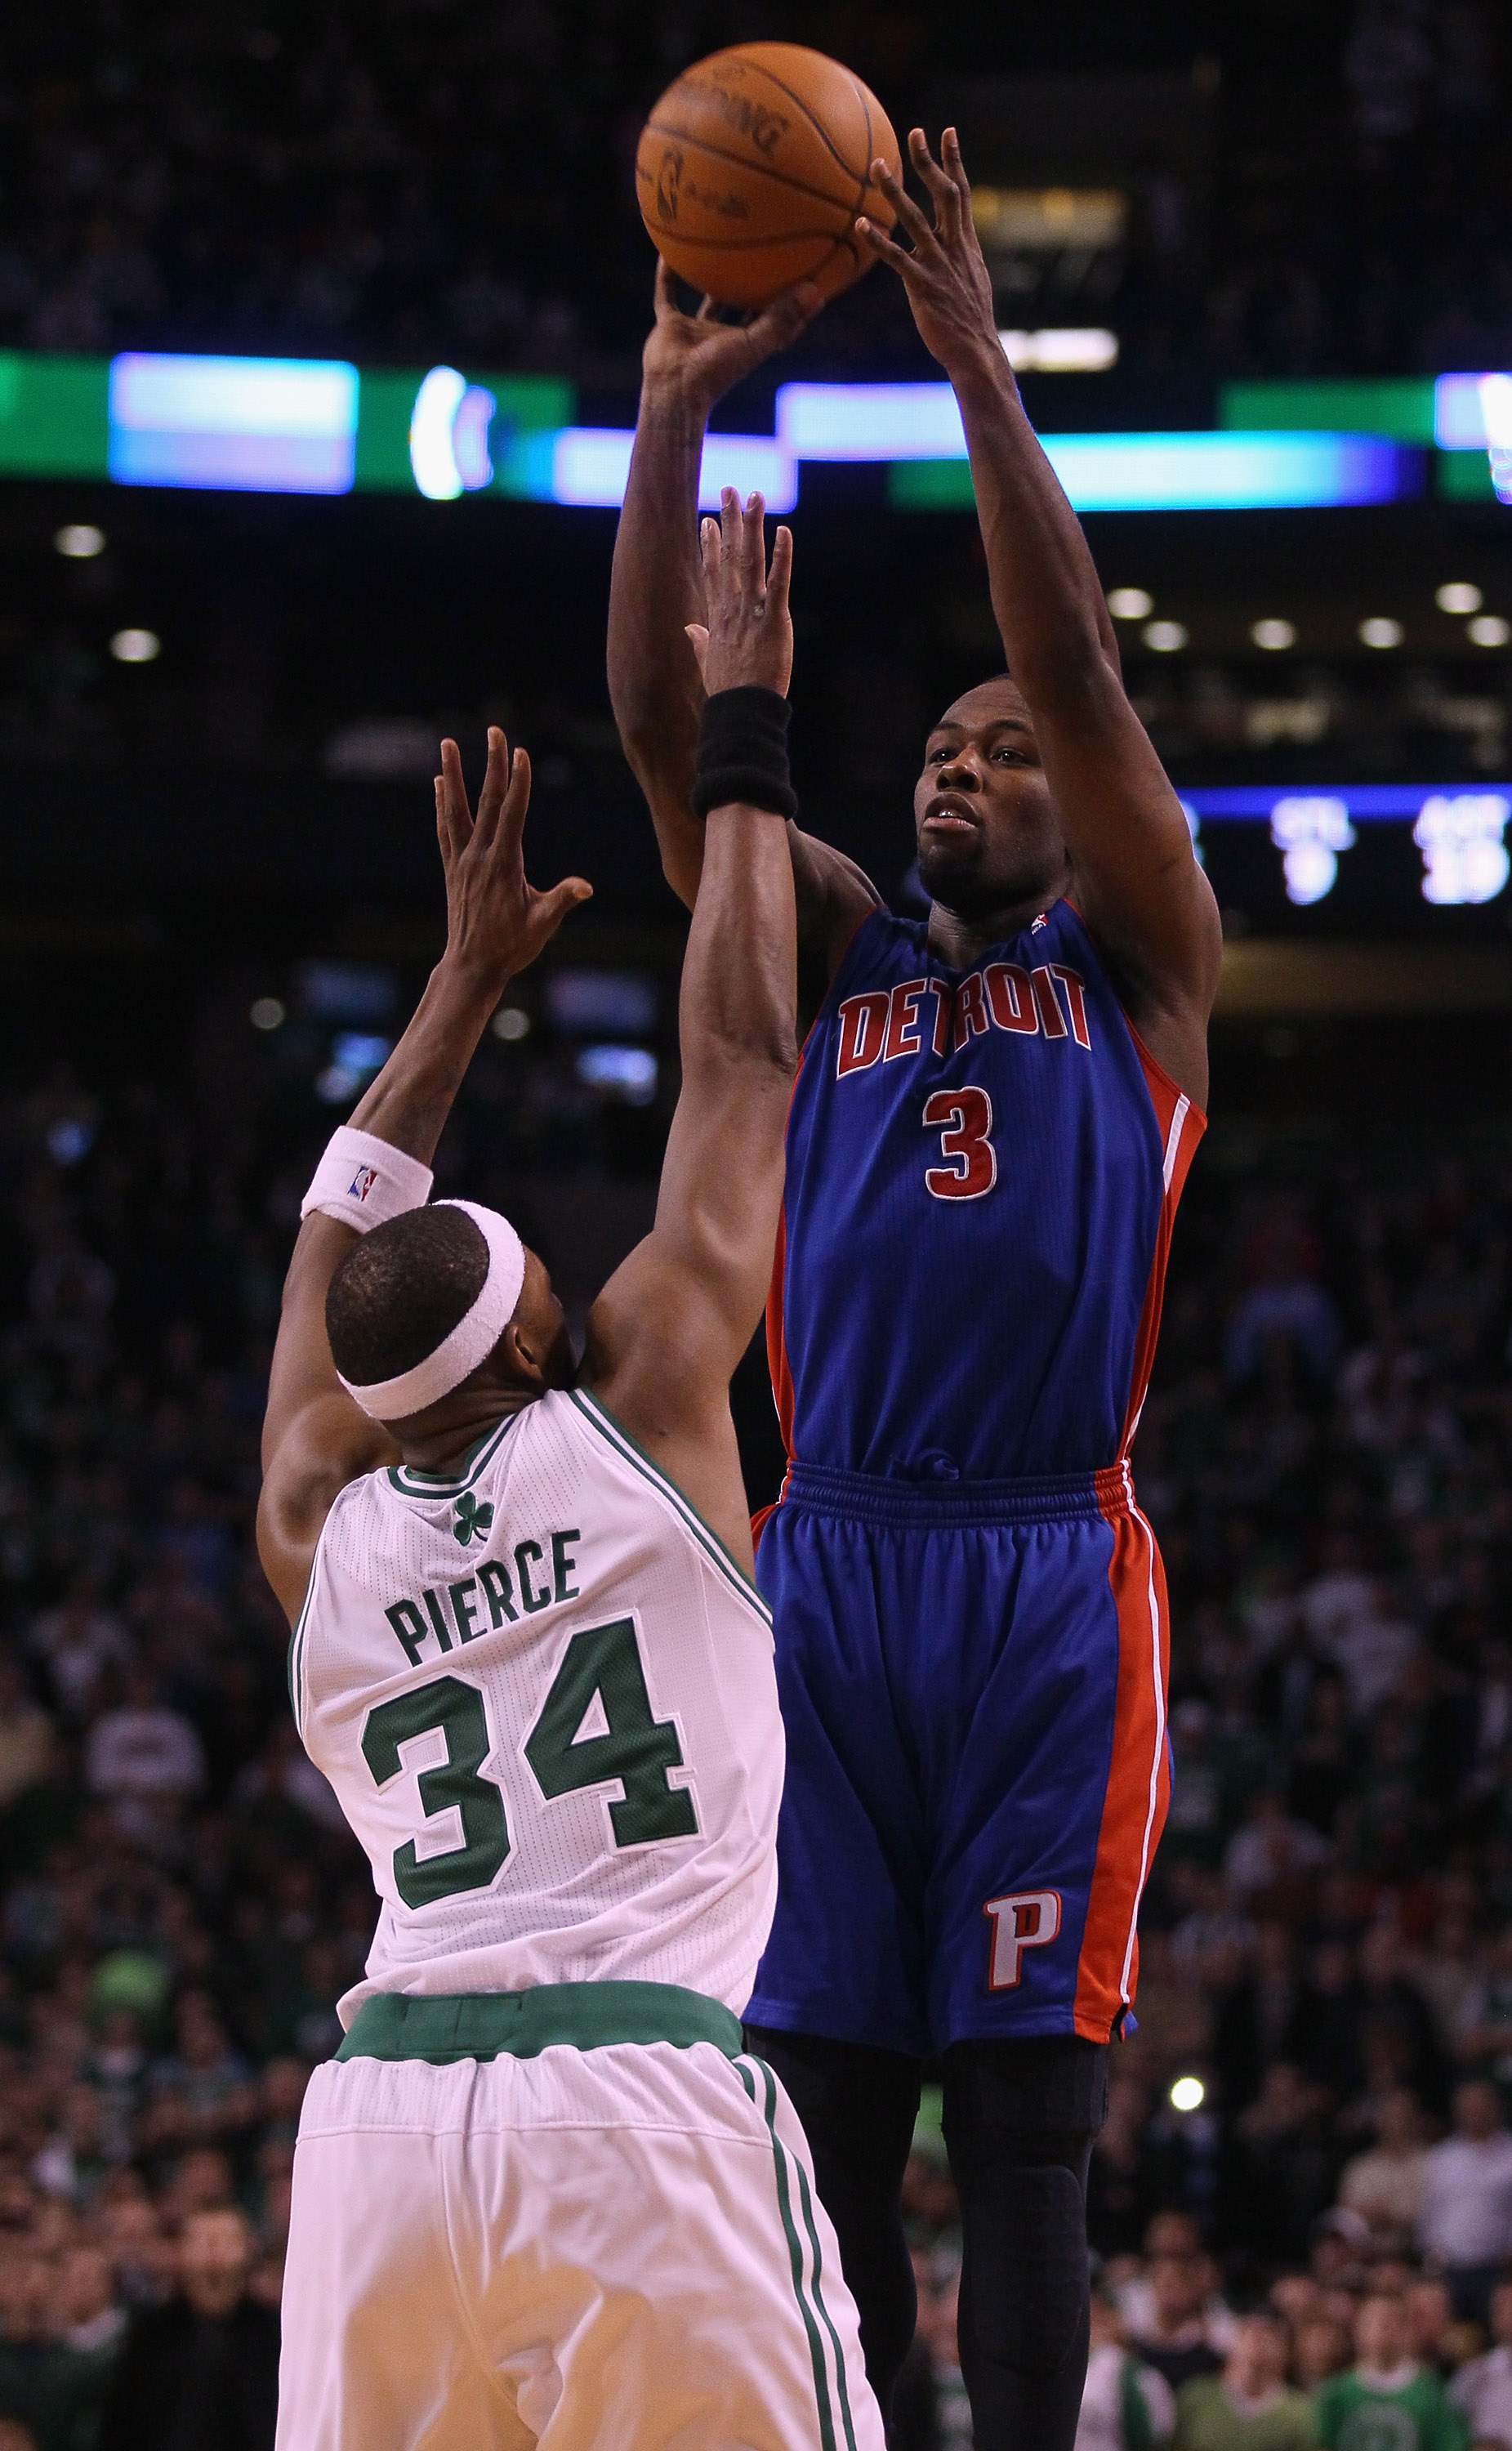 BOSTON, MA - JANUARY 19:  Rodney Stuckey #3 of the Detroit Pistons takes a shot over Paul Pierce #34 of the Boston Celtics on January 19, 2011 at the TD Garden in Boston, Massachusetts. The Celtics defeated the Pistons 86-82. NOTE TO USER: User expressly